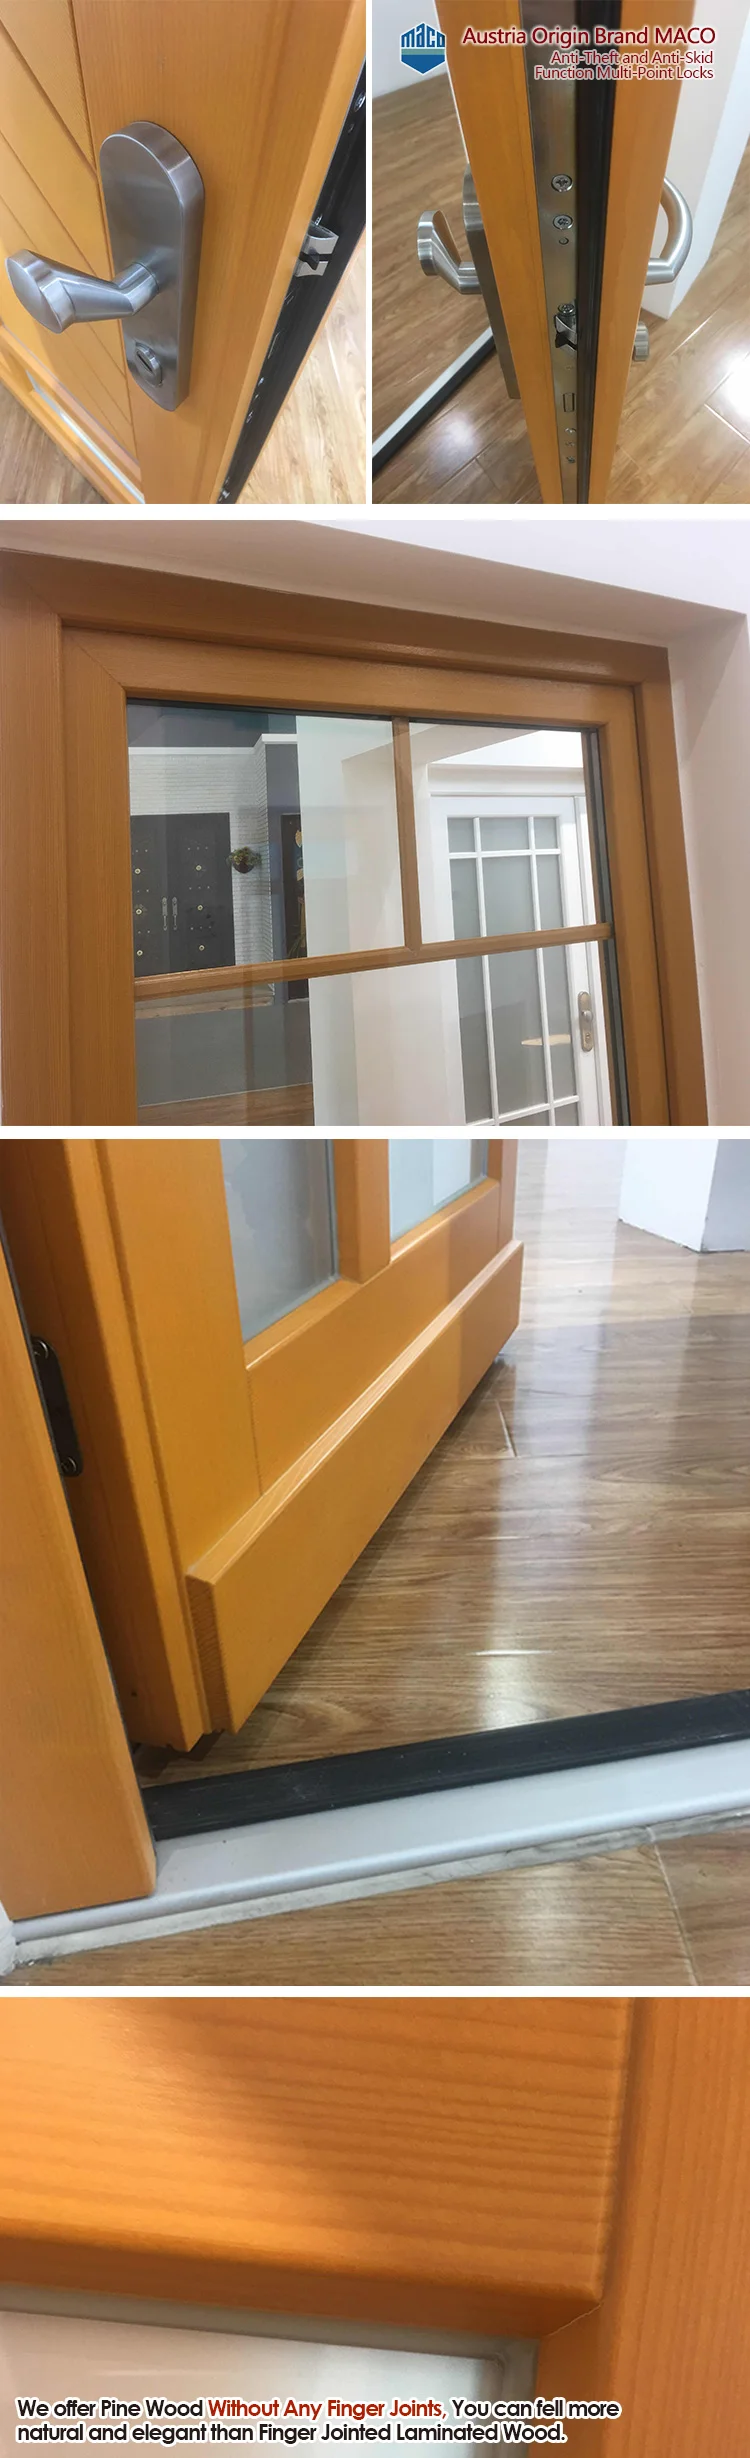 Hot selling products used commercial glass entry door tempered office glass door